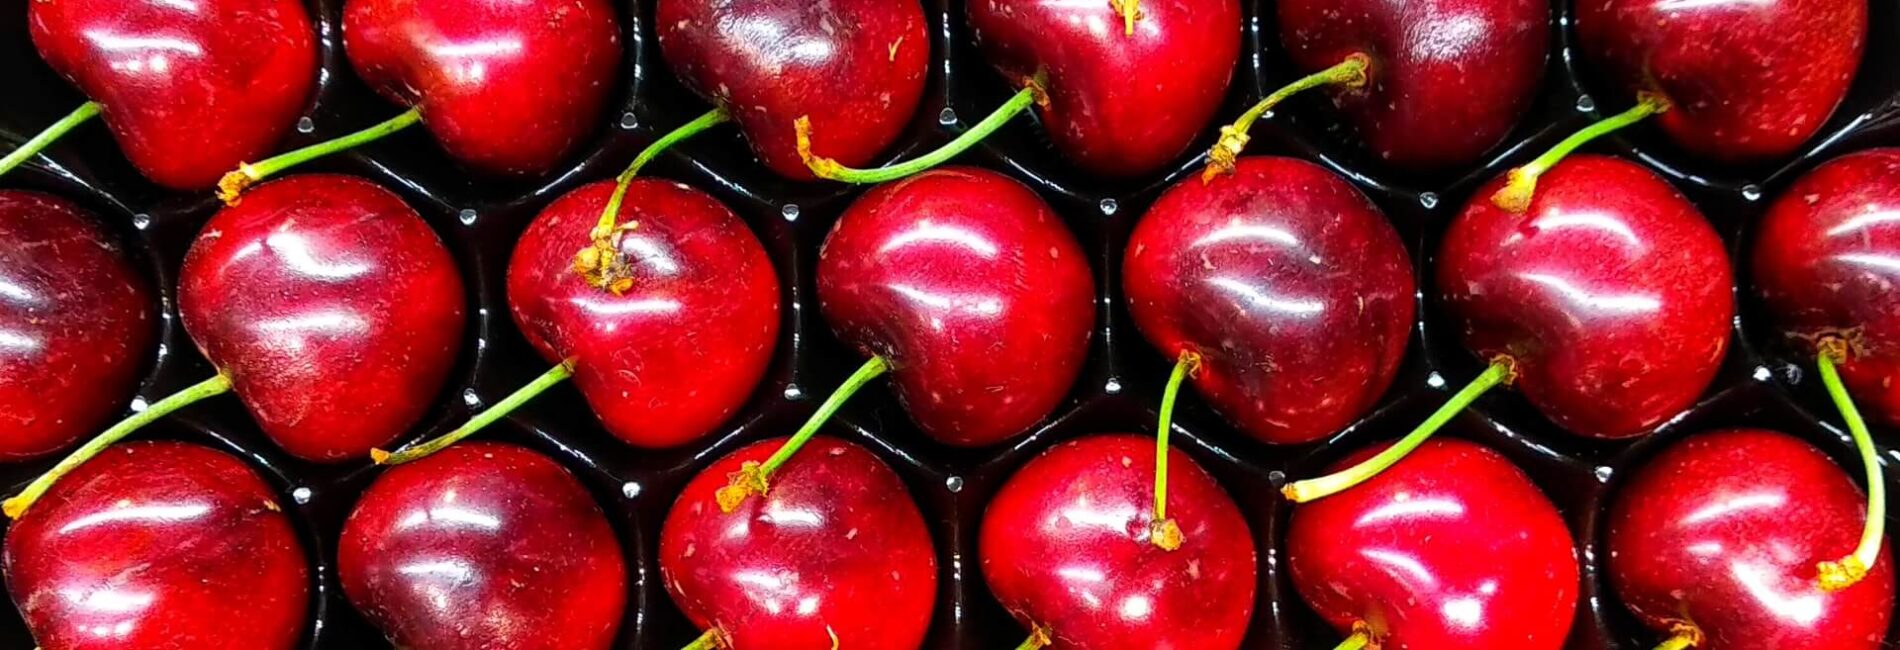 Did You Know–Cherries Can Relieve Headaches